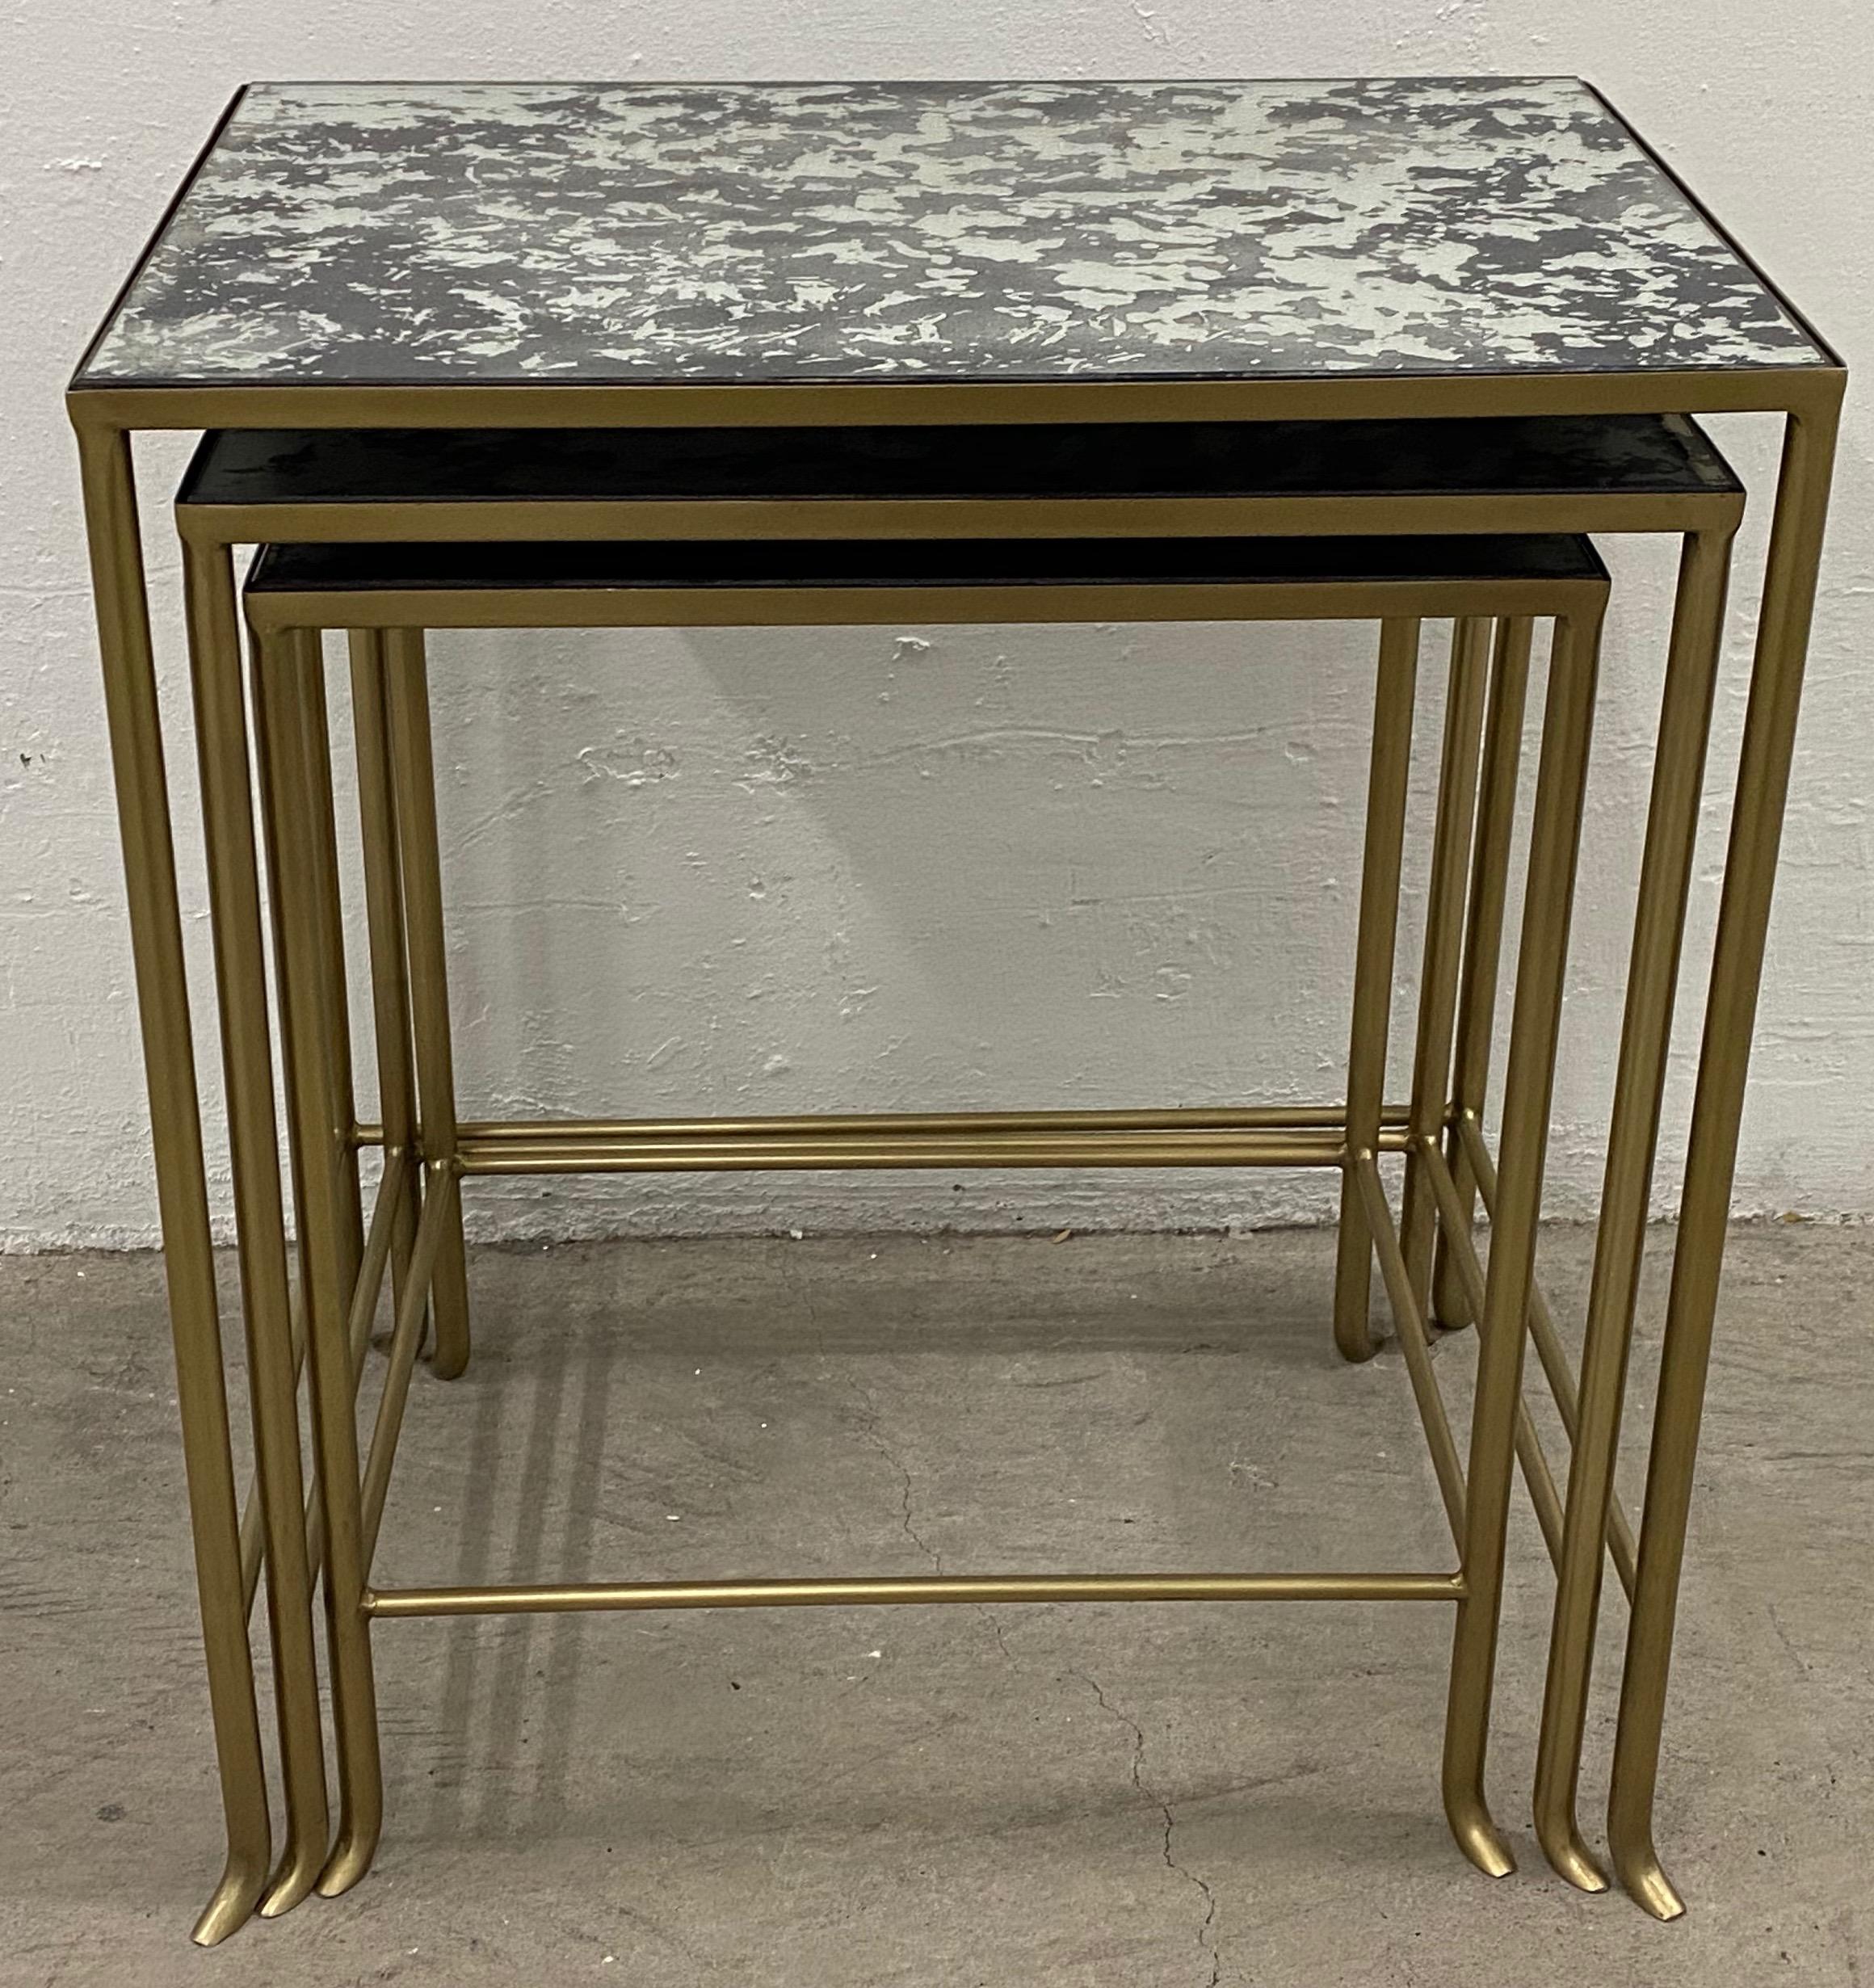 Set of three contemporary brass plate steel and flecked mirror nesting tables

These contemporary tables have a Classic mid modern touch.

The tables nest for easy storage. Pull one, or both out for an extra surface when your friends or family